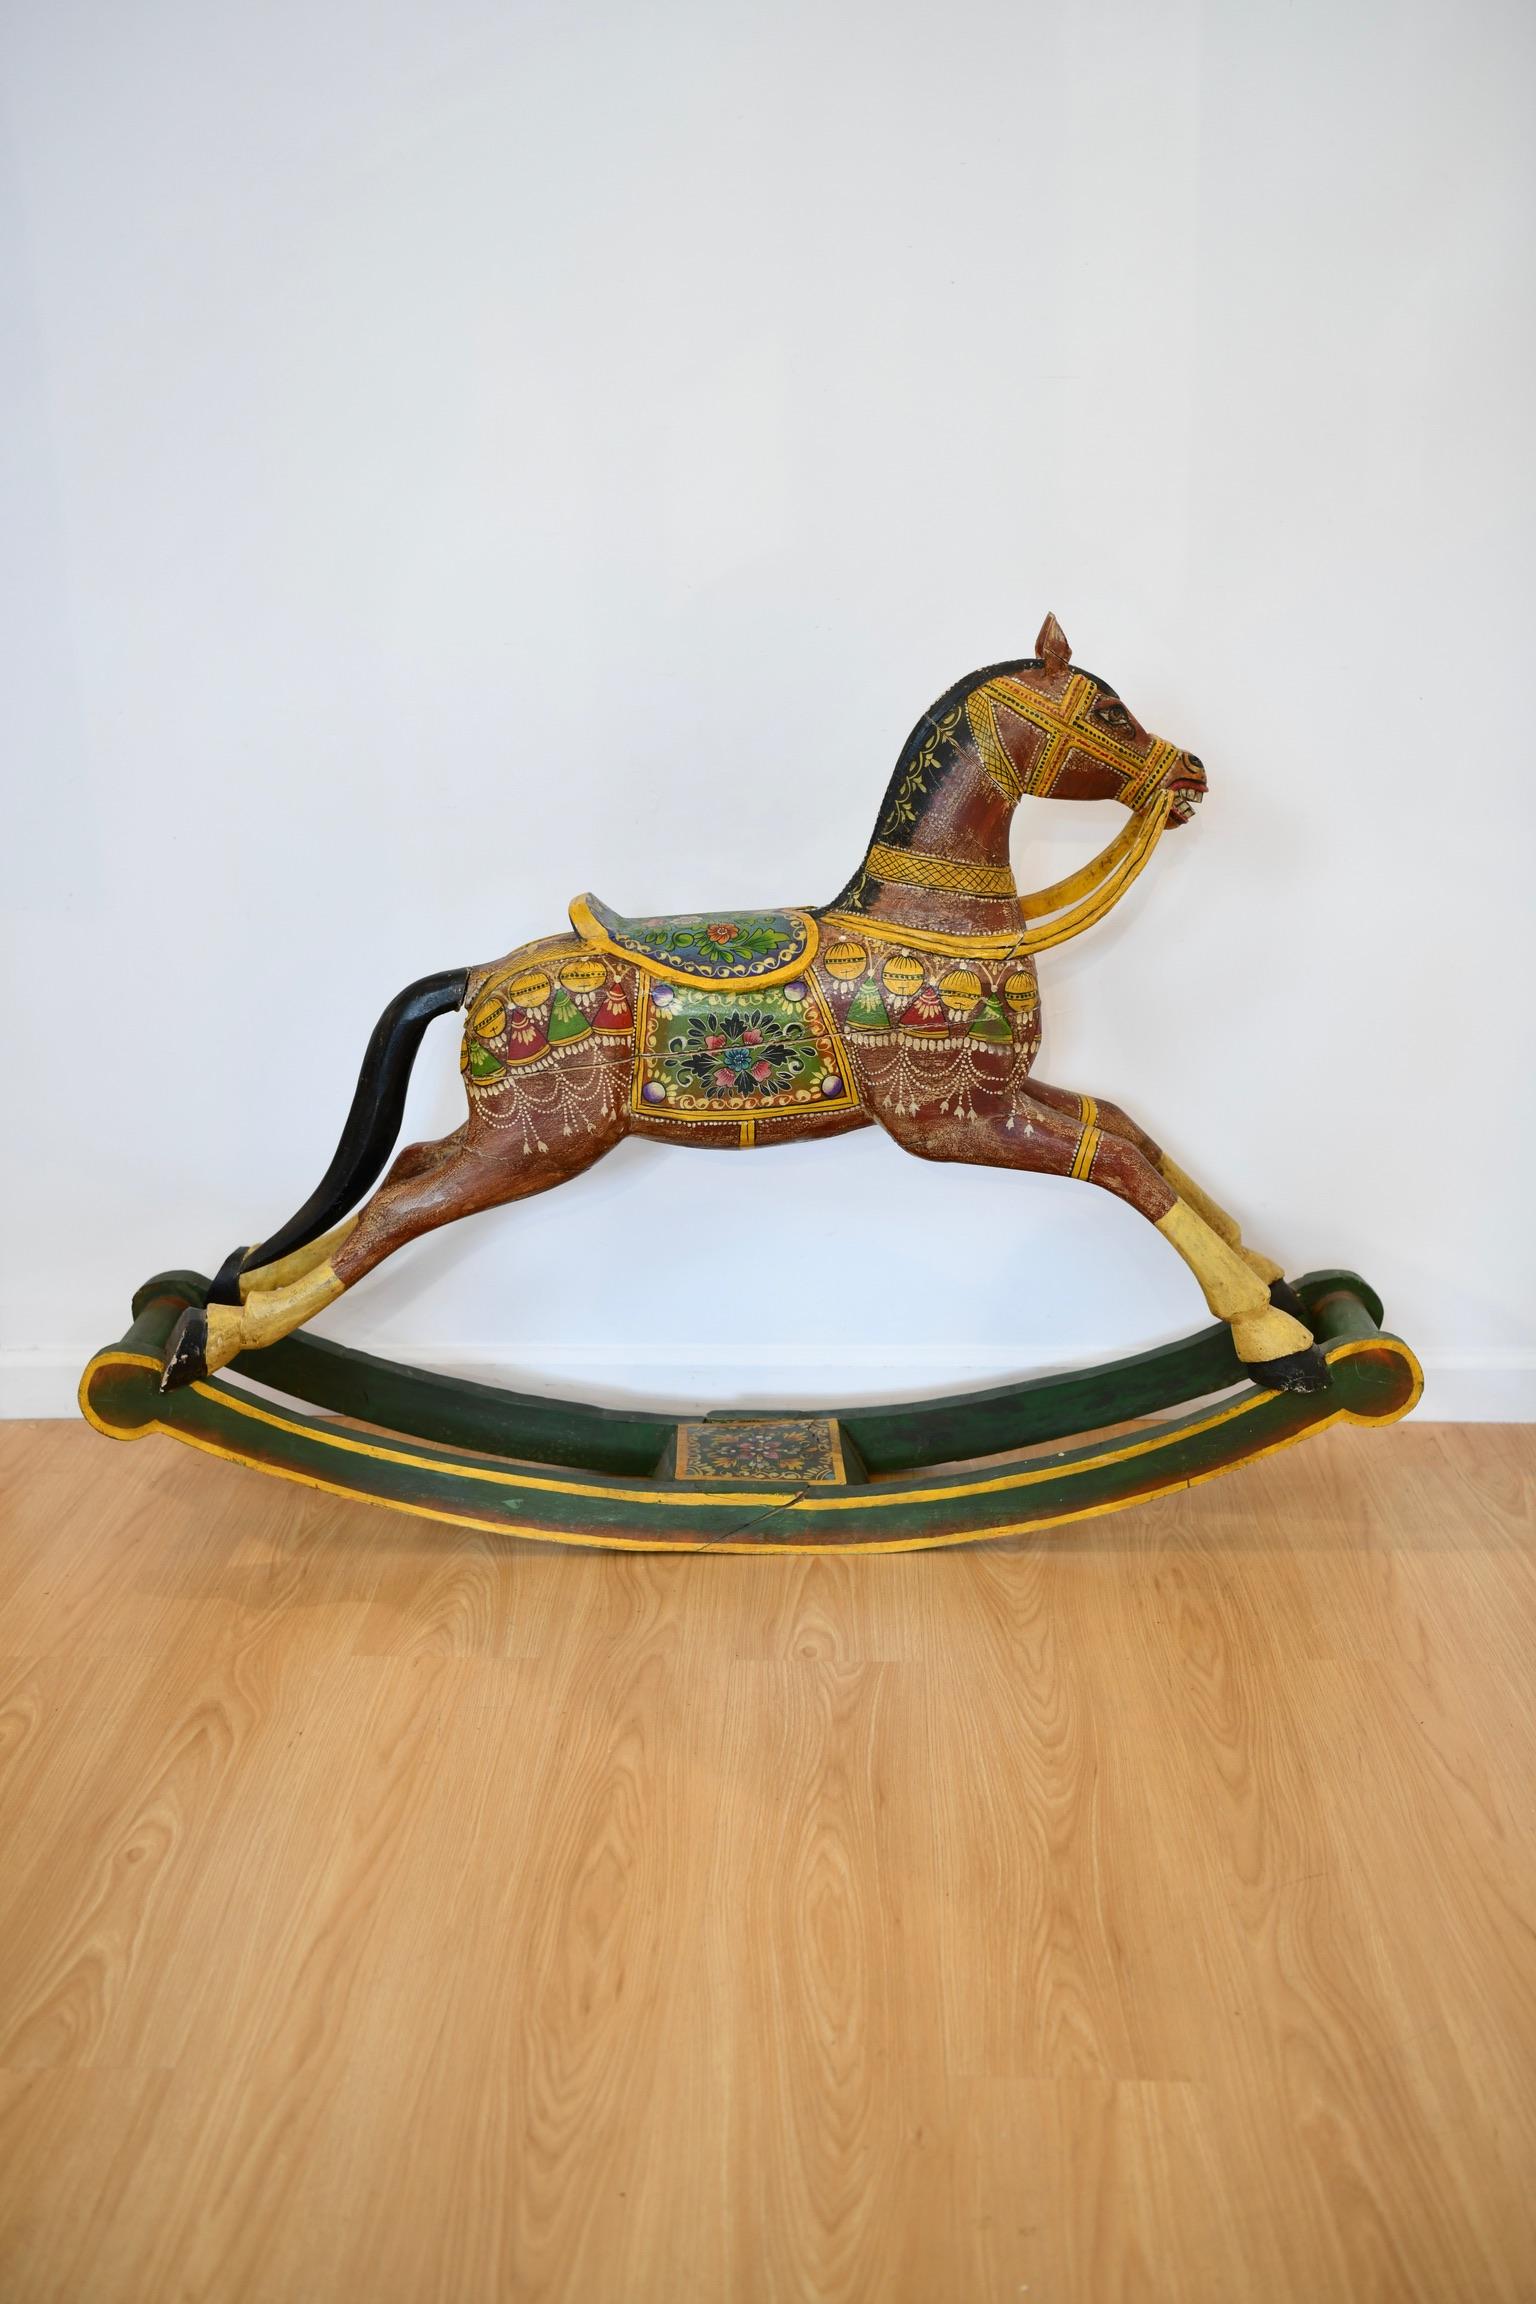 Antique Folk Art painted and decorated rocking horse. In antique condition with splits and repairs, pictured. Dimensions: 37.5